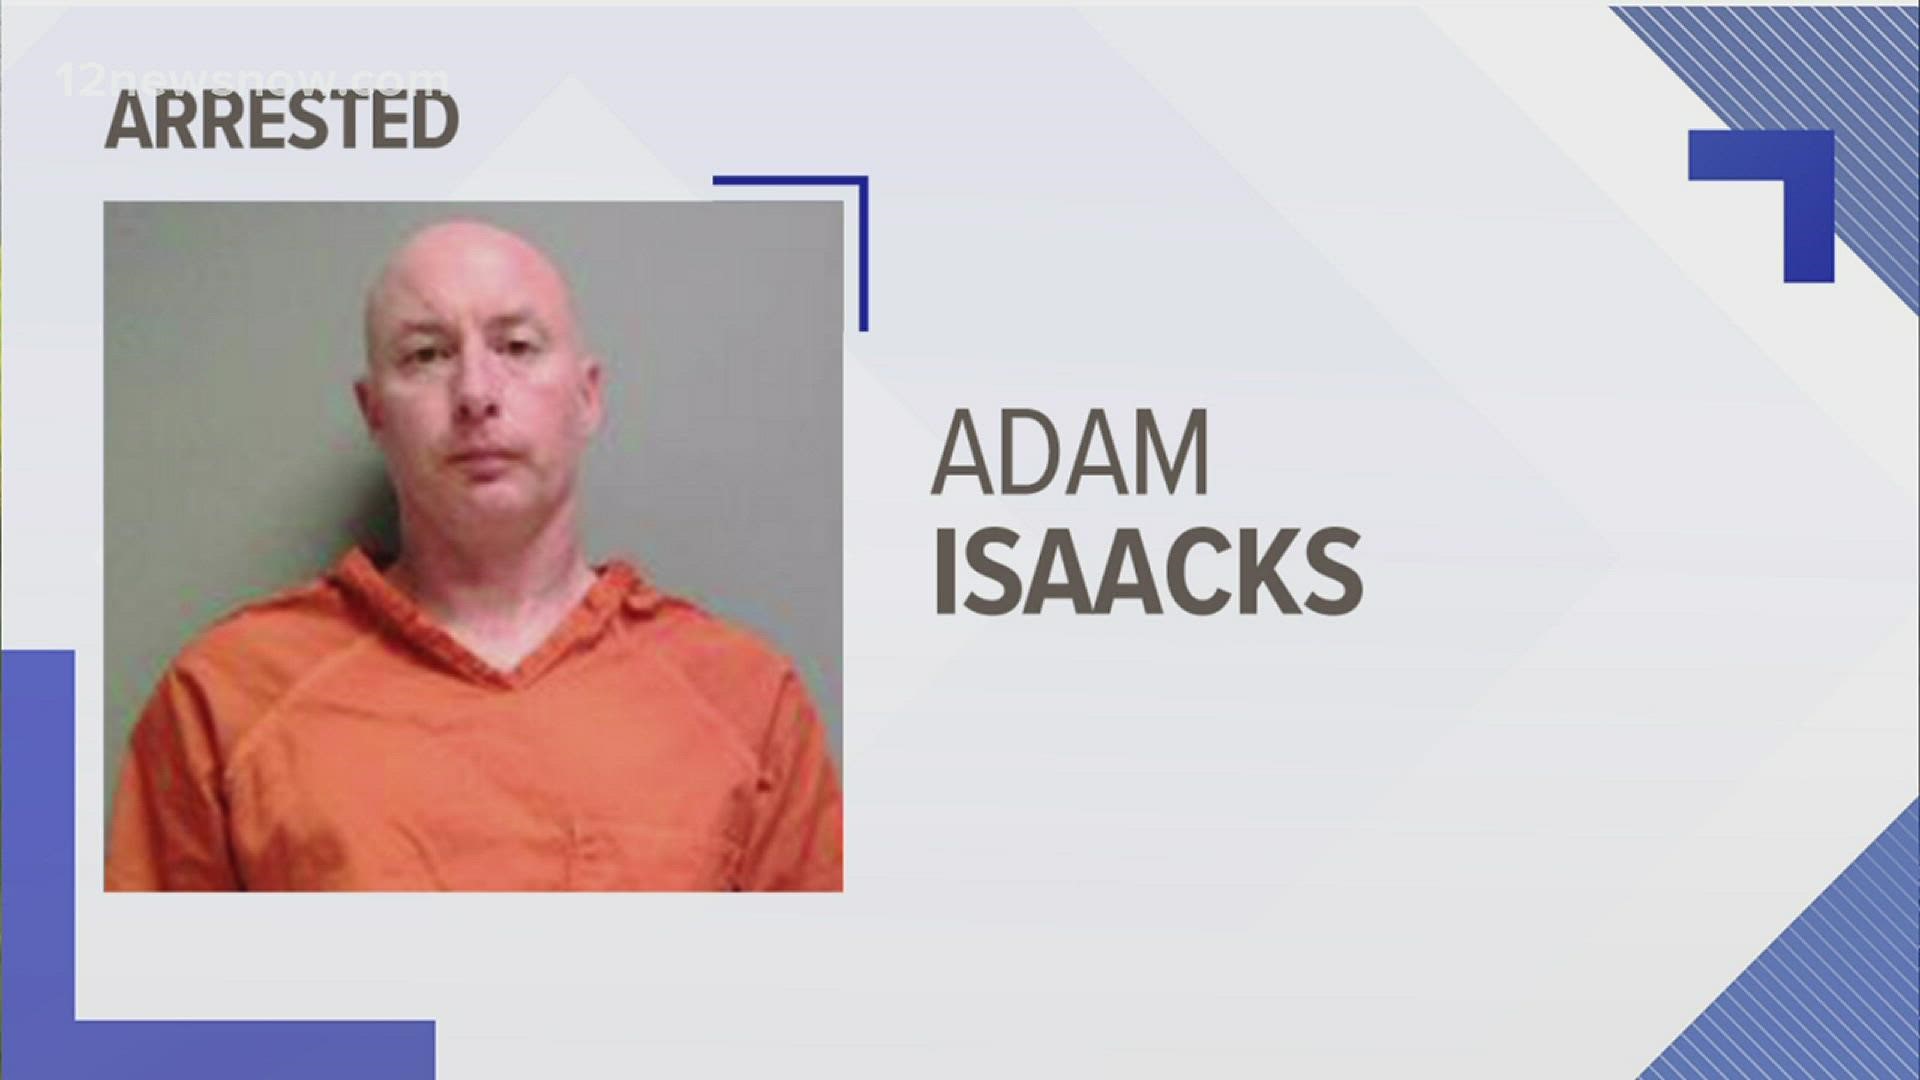 Silsbee resident Adam Isaack was arrested Thursday, Dec. 30 in Sabine County. The 38-year-old is accused of indecency with a child.